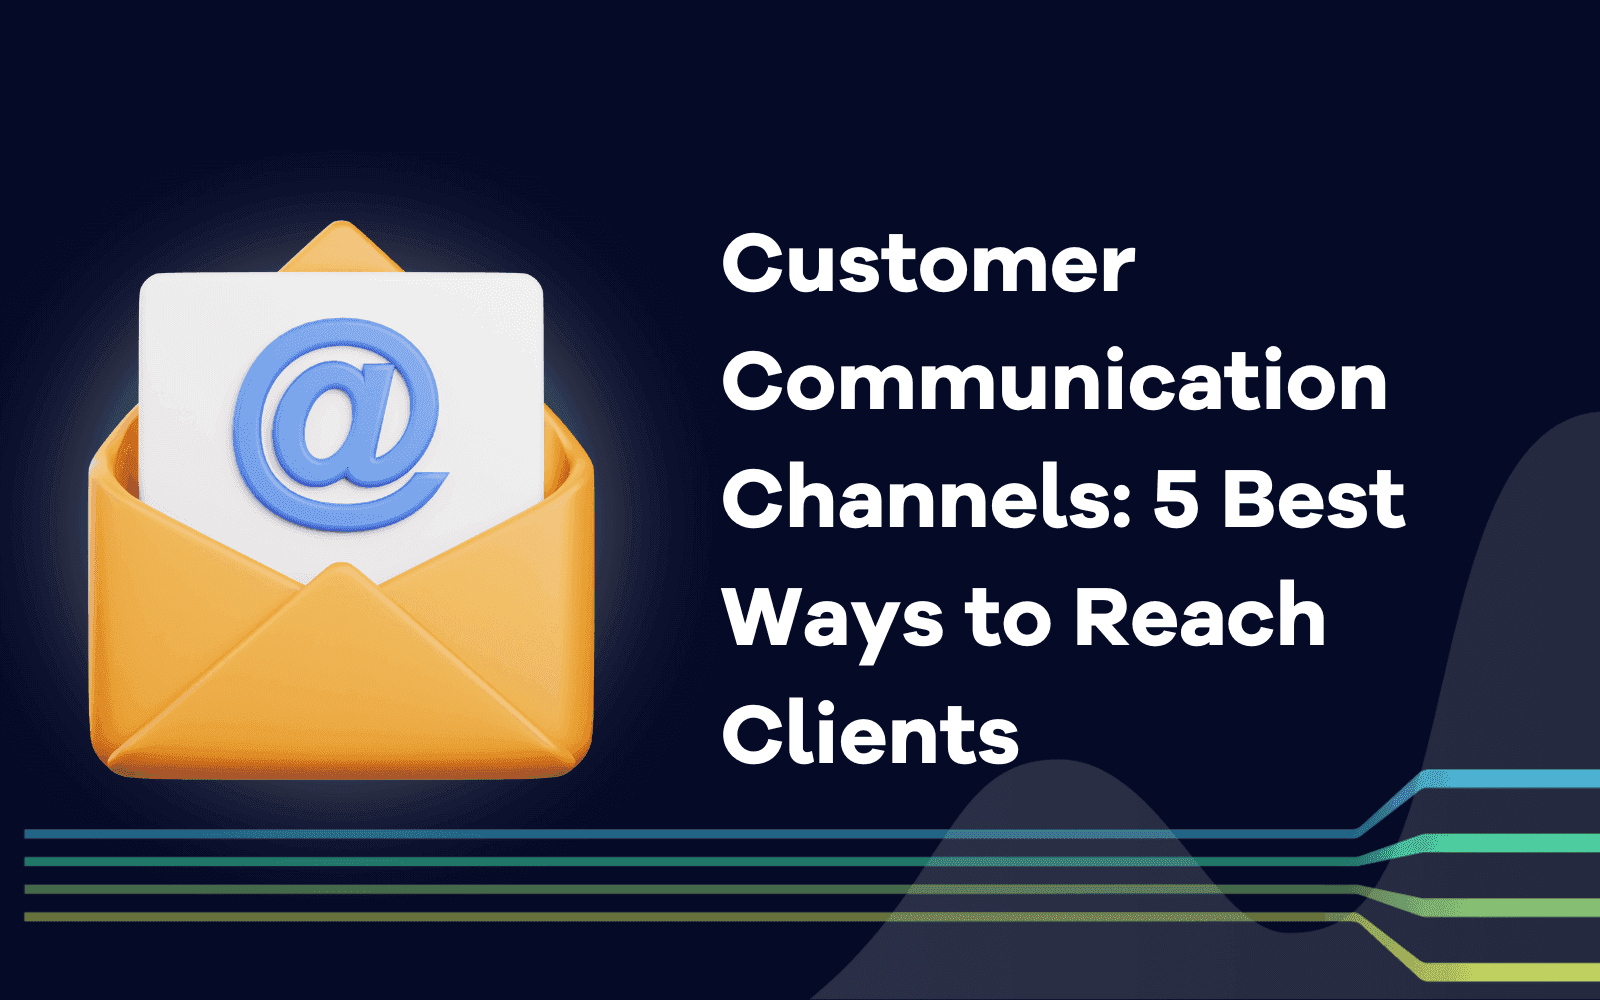 Customer Communication Channels 5 Best Ways to Reach Clients